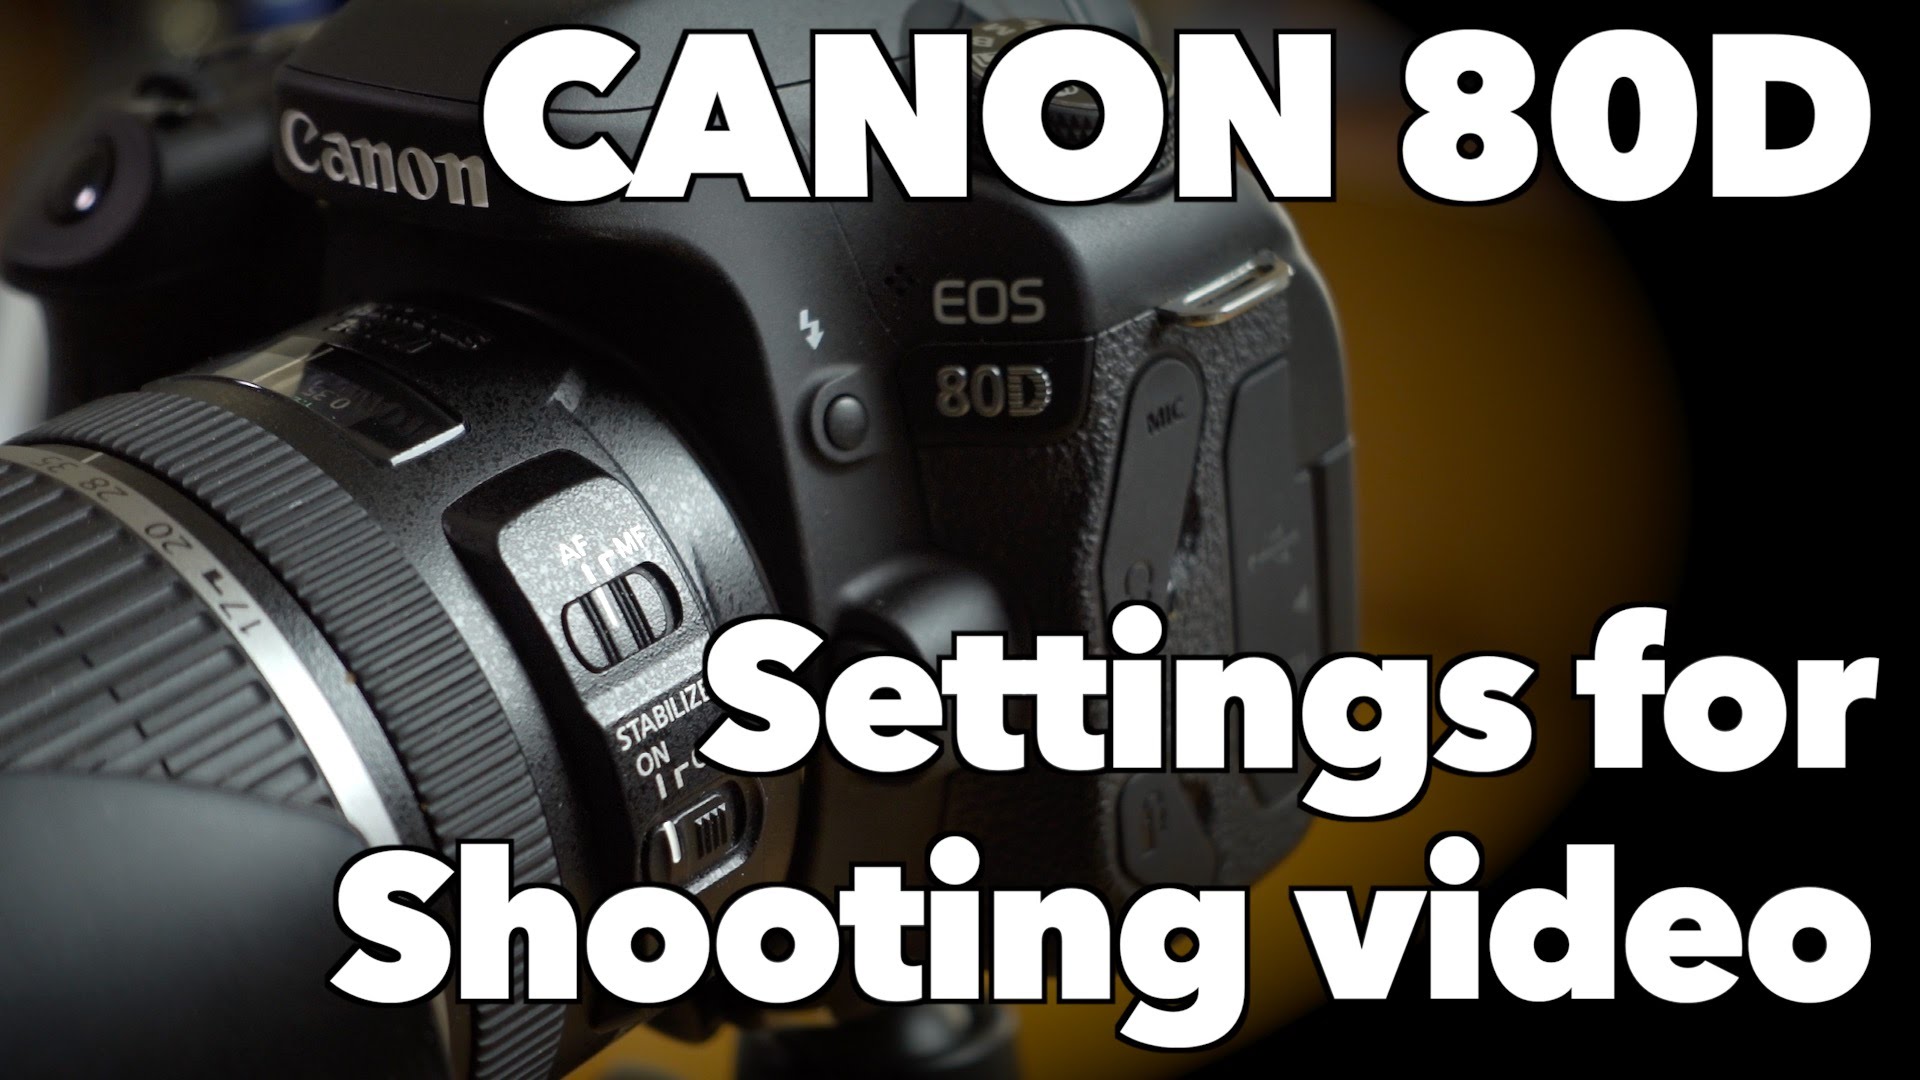 Canon 80D Settings for Shooting High Quality Video